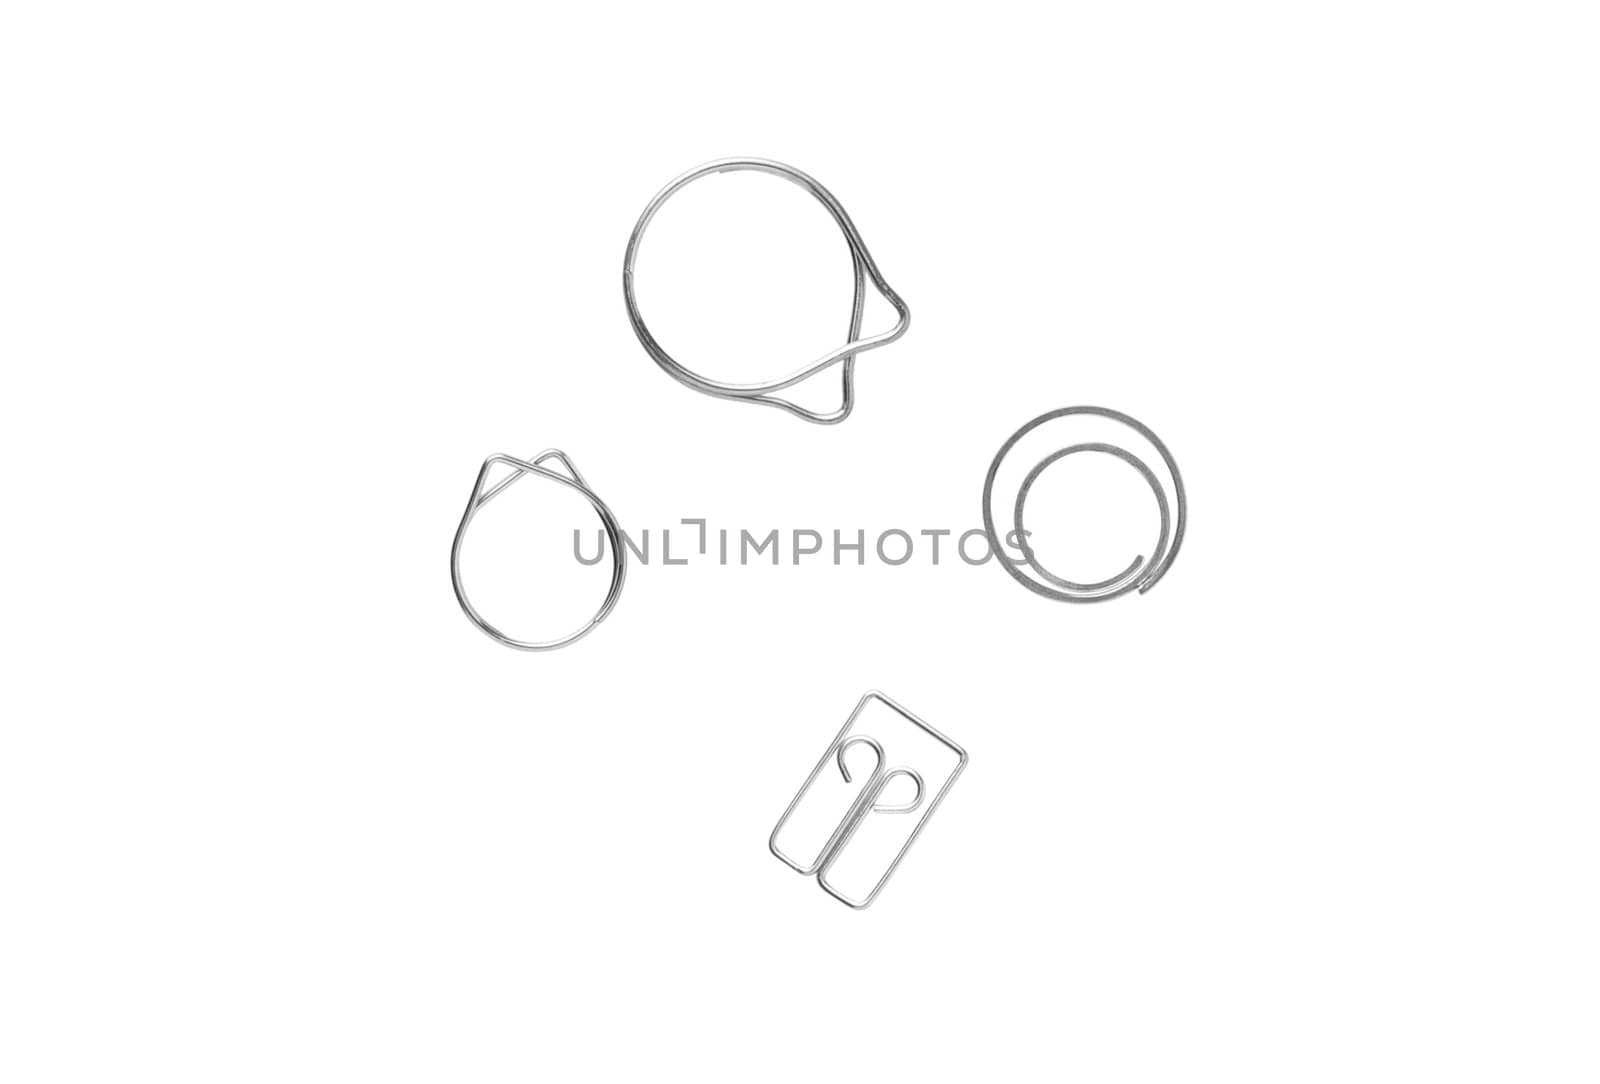 Collection of paper clips isolated on white